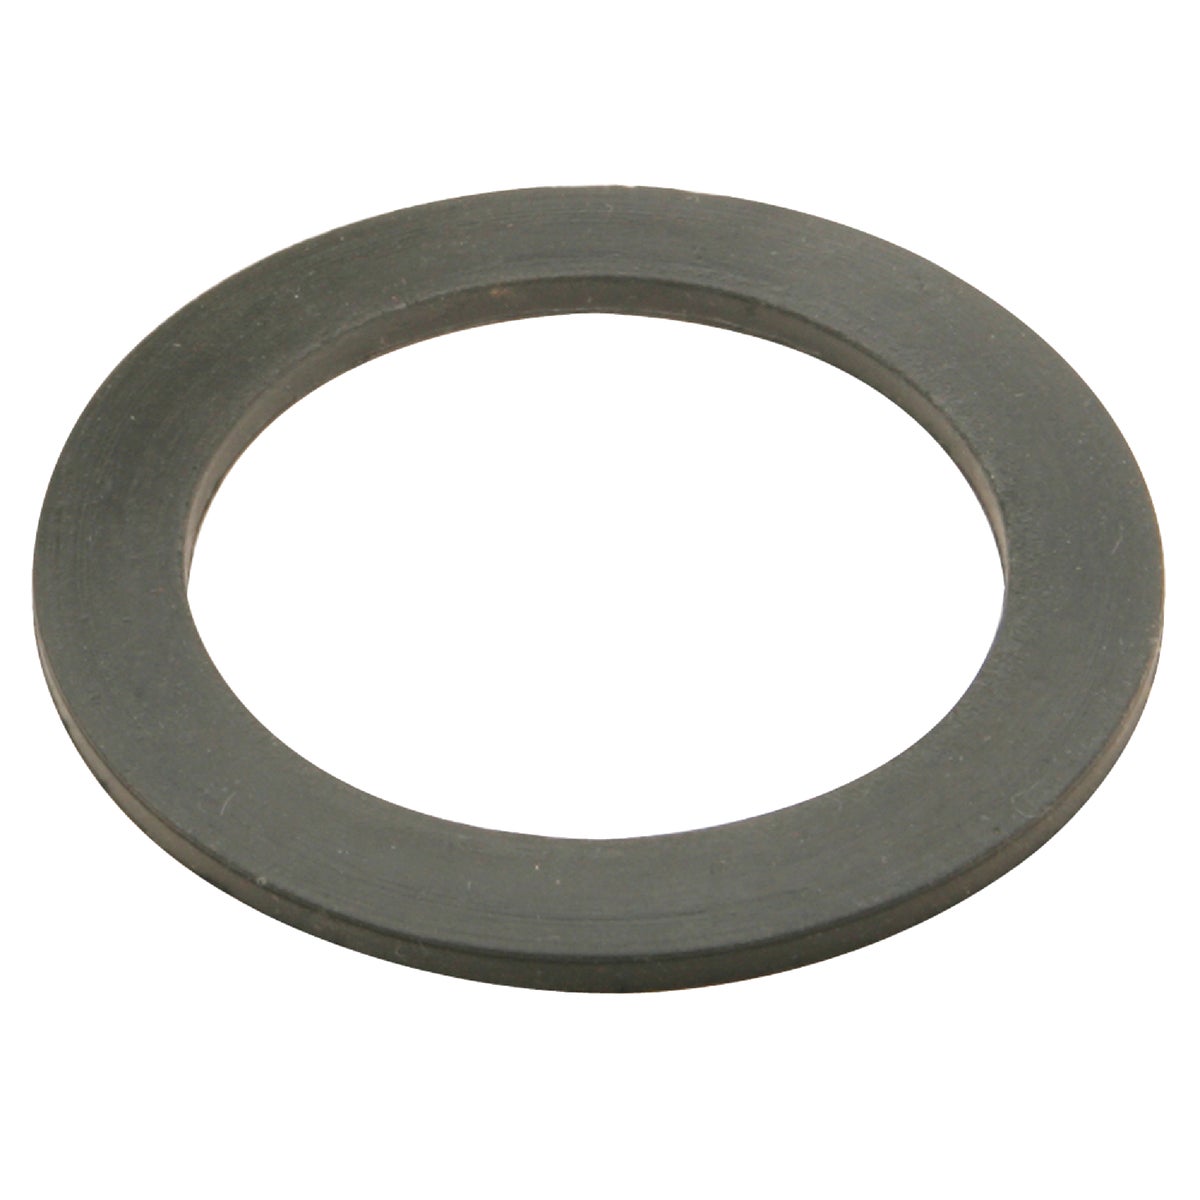 RUBBER TAILPIECE WASHER